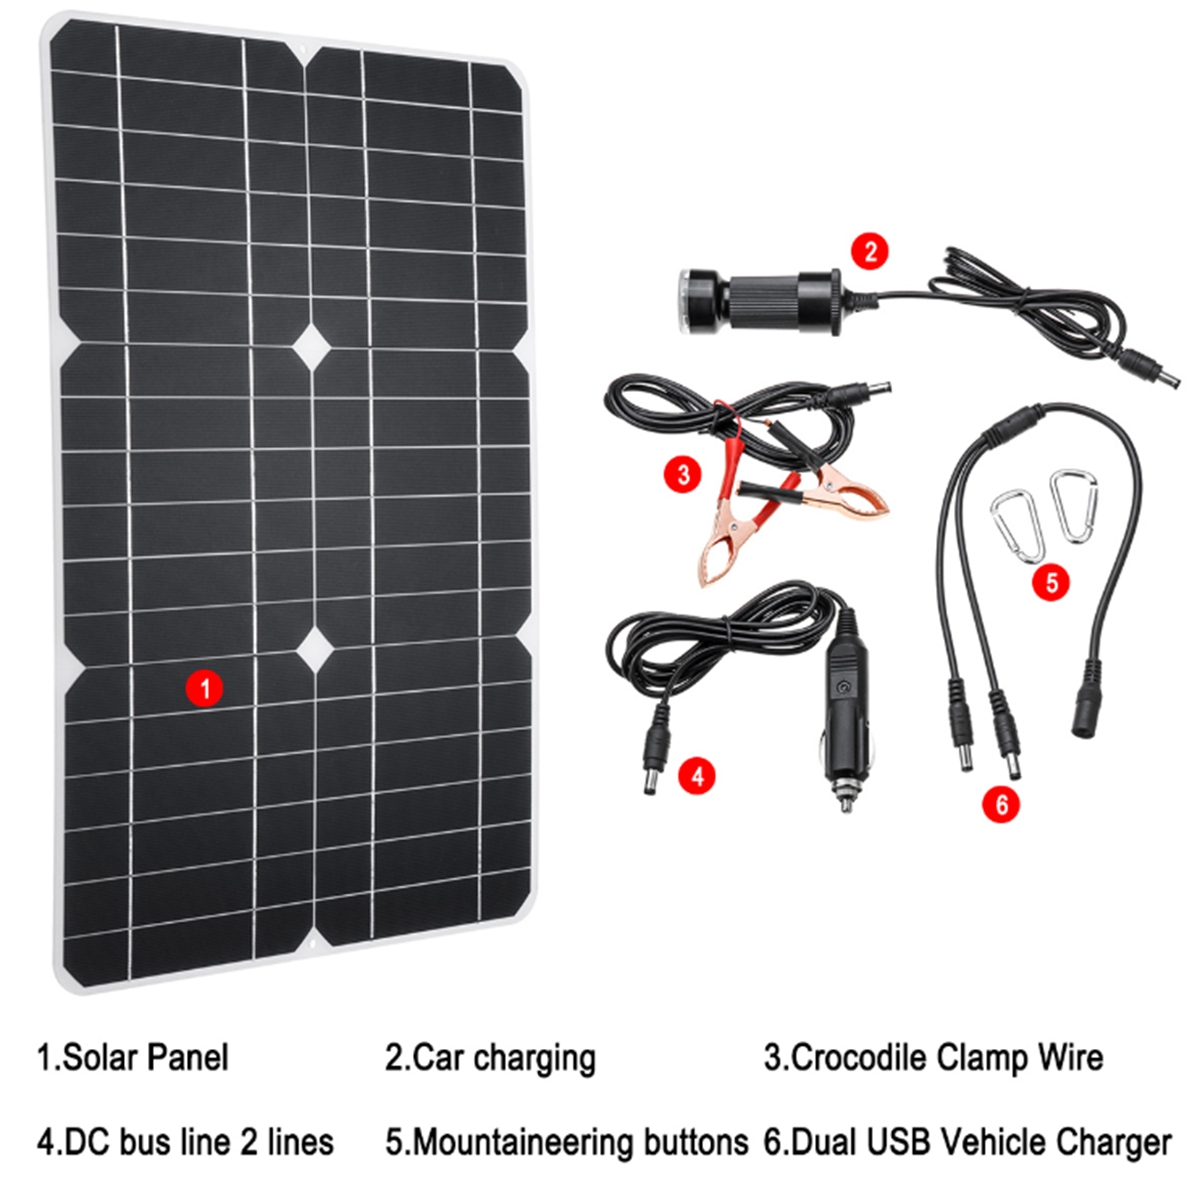 100W-18V-Solar-Panel-Monocrystalline-Silicon-Battery-Charger-Kit-for-Cycling-Climbing-Hiking-Camping-1778312-4